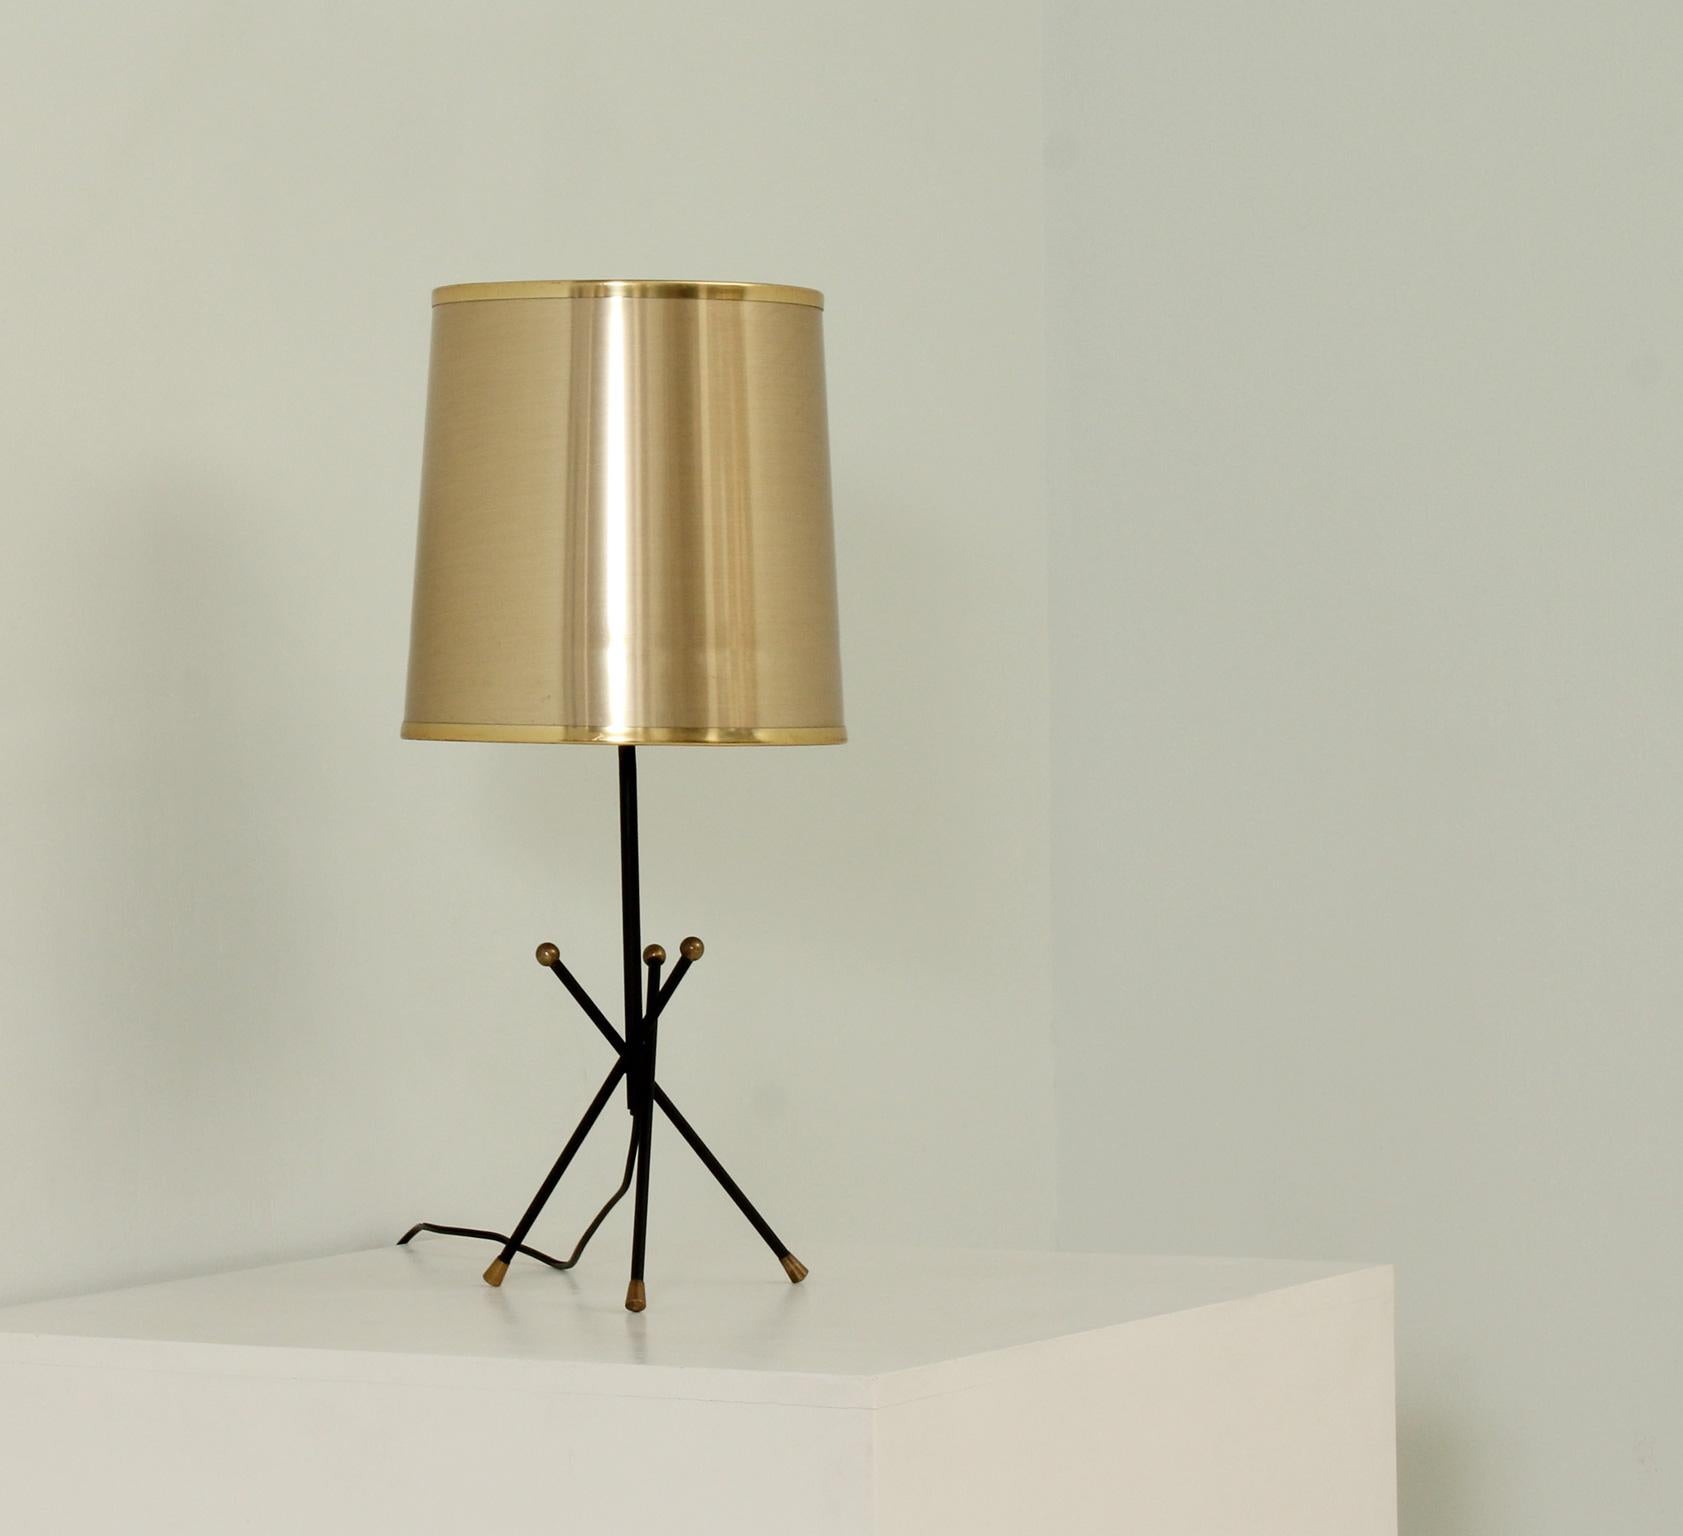 Tripod table lamp from 1950's, Spain. Black metal base with brass details, the shade is later in gold plastic.